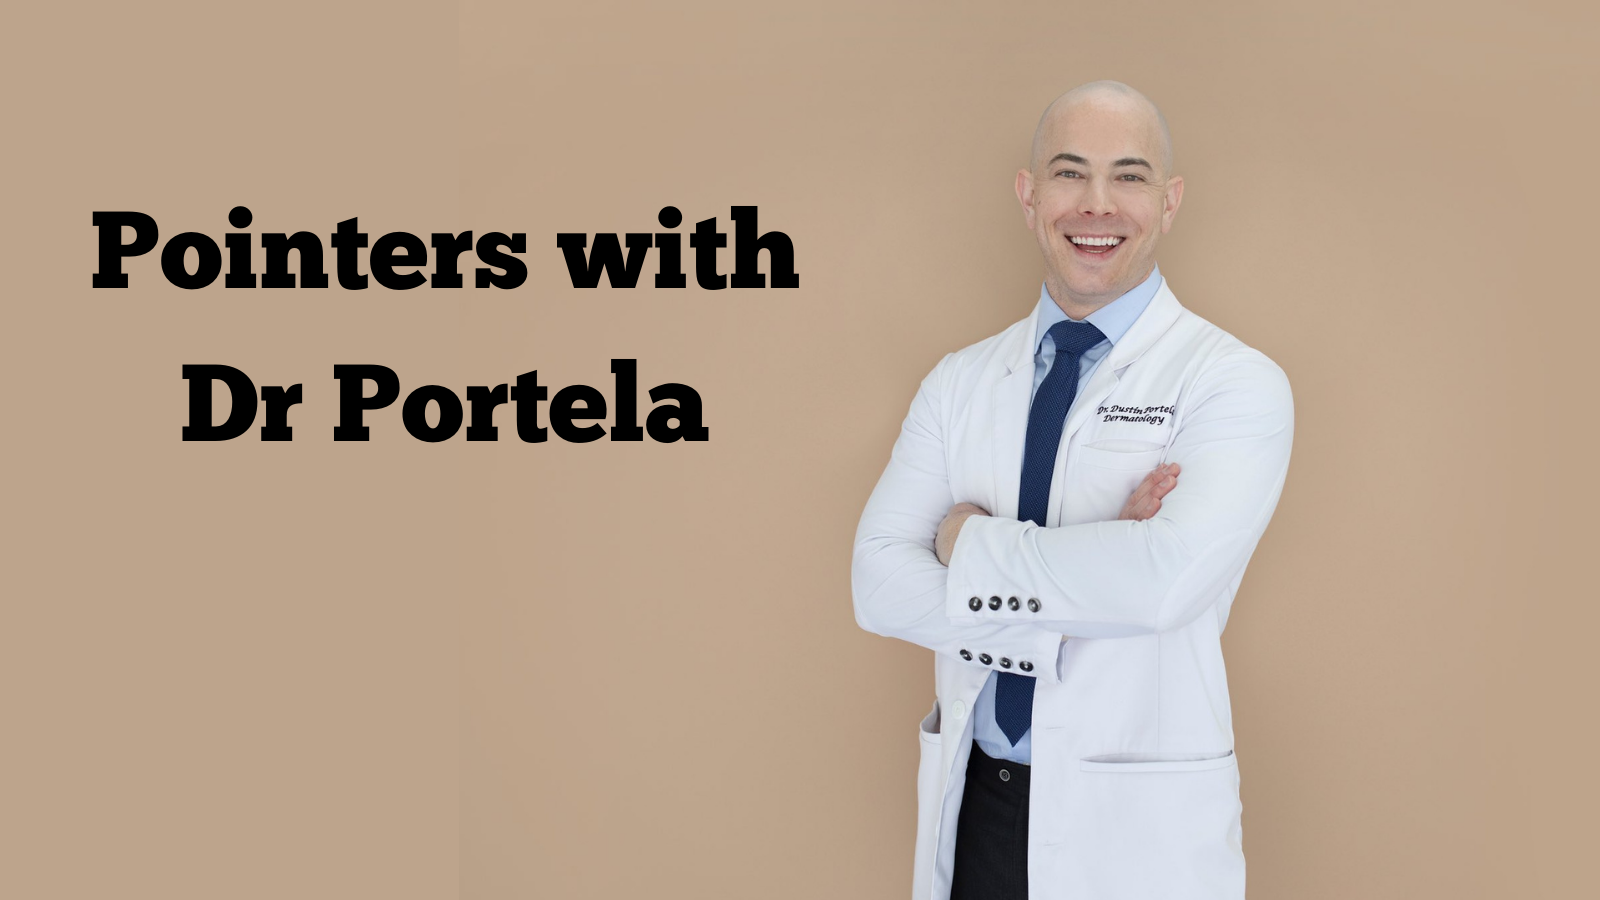 Pointers With Portela: Wrapping up Melanoma Awareness Month